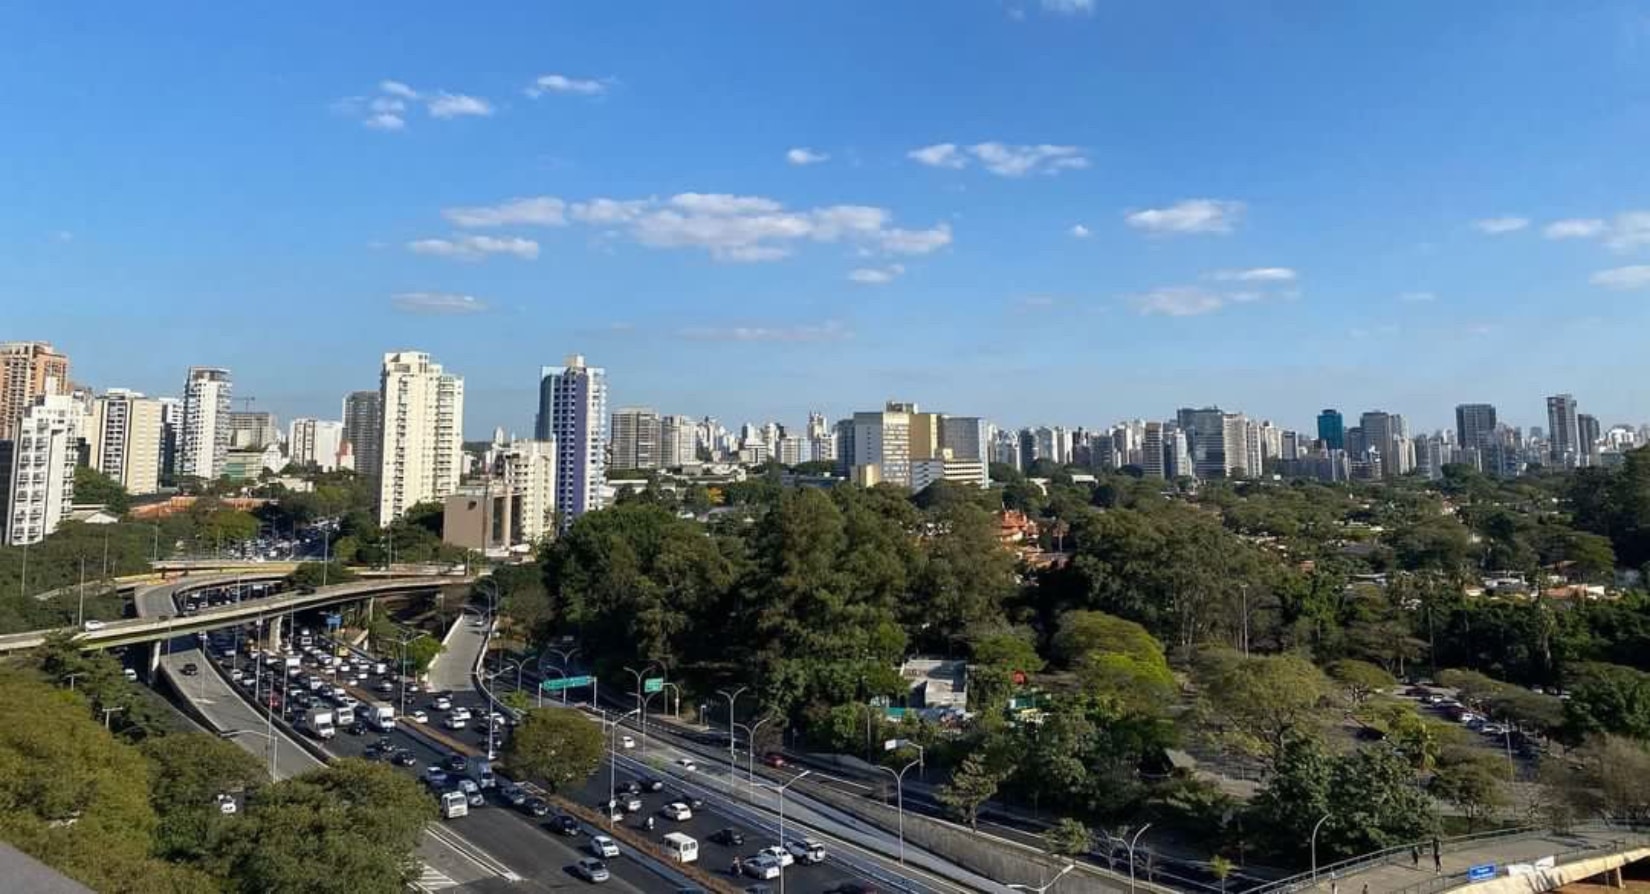 View of the famous Paulista Avenue, financial center of the city